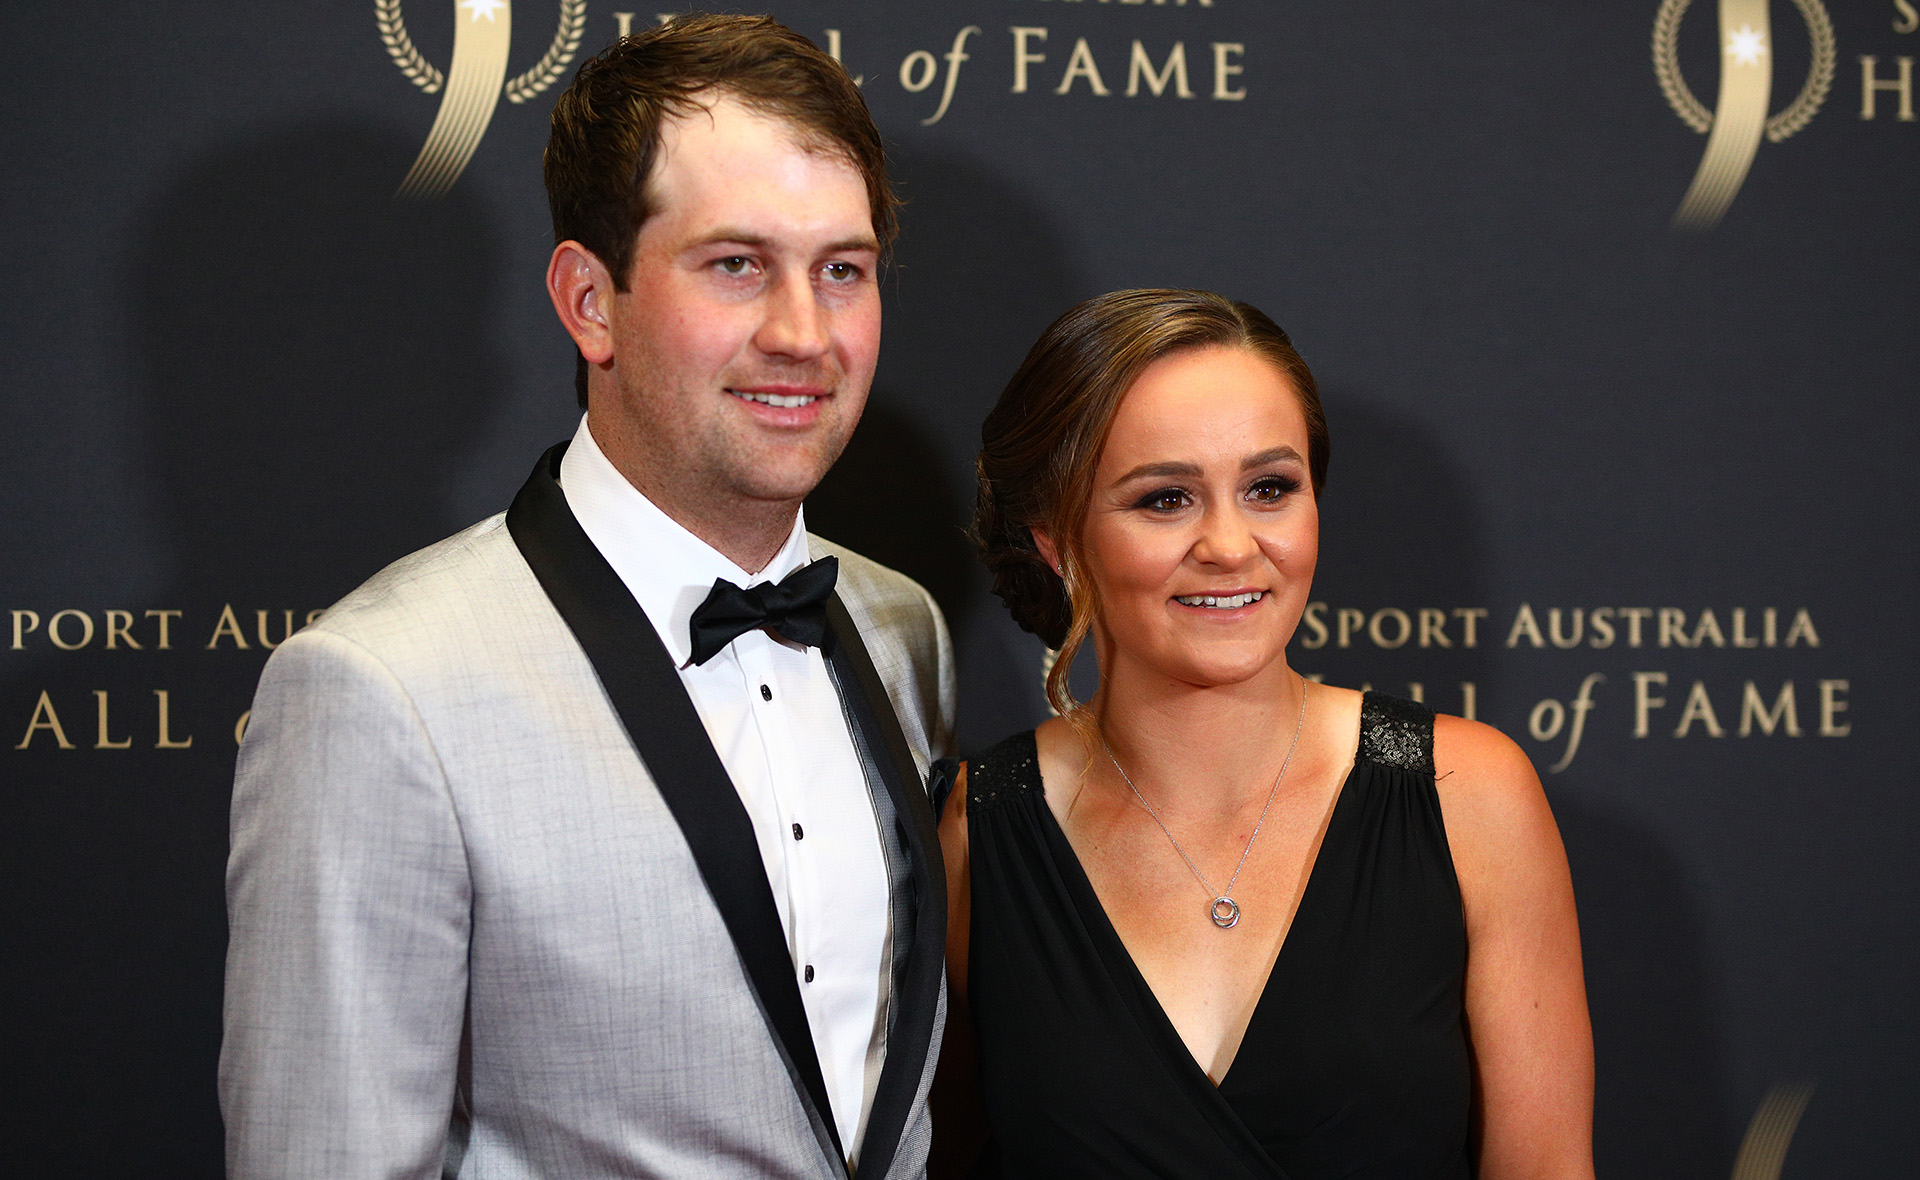 EXCLUSIVE: Ash Barty’s down-to-earth wedding plans! What to expect when she says “I do” to Garry Kissick